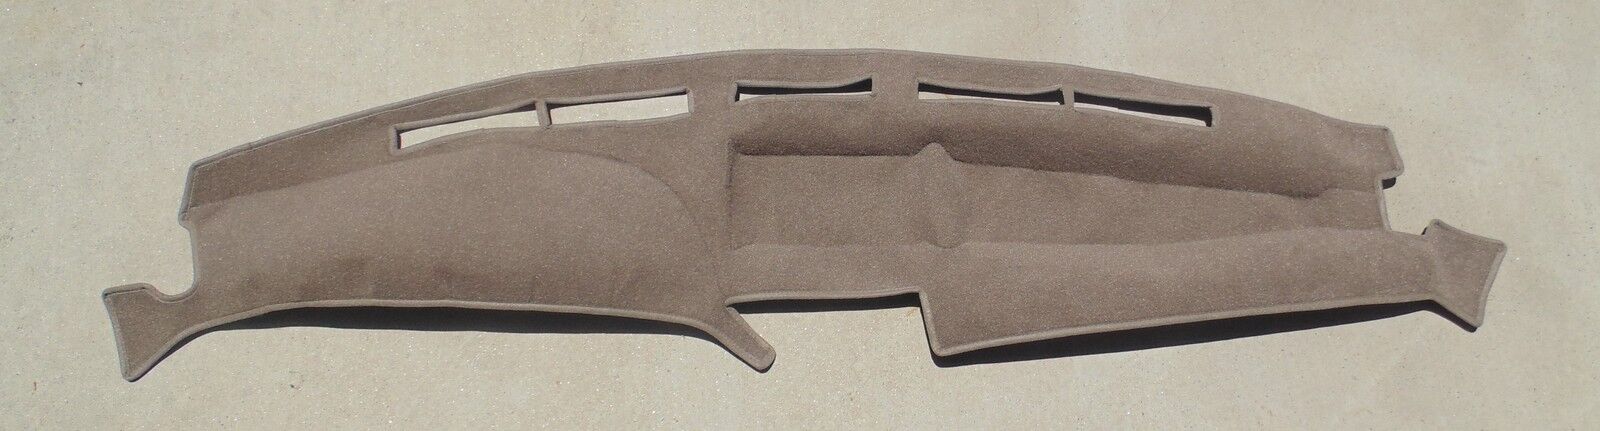 1992-1996  FORD  BRONCO FULL SIZE  DASH COVER MAT    taupe